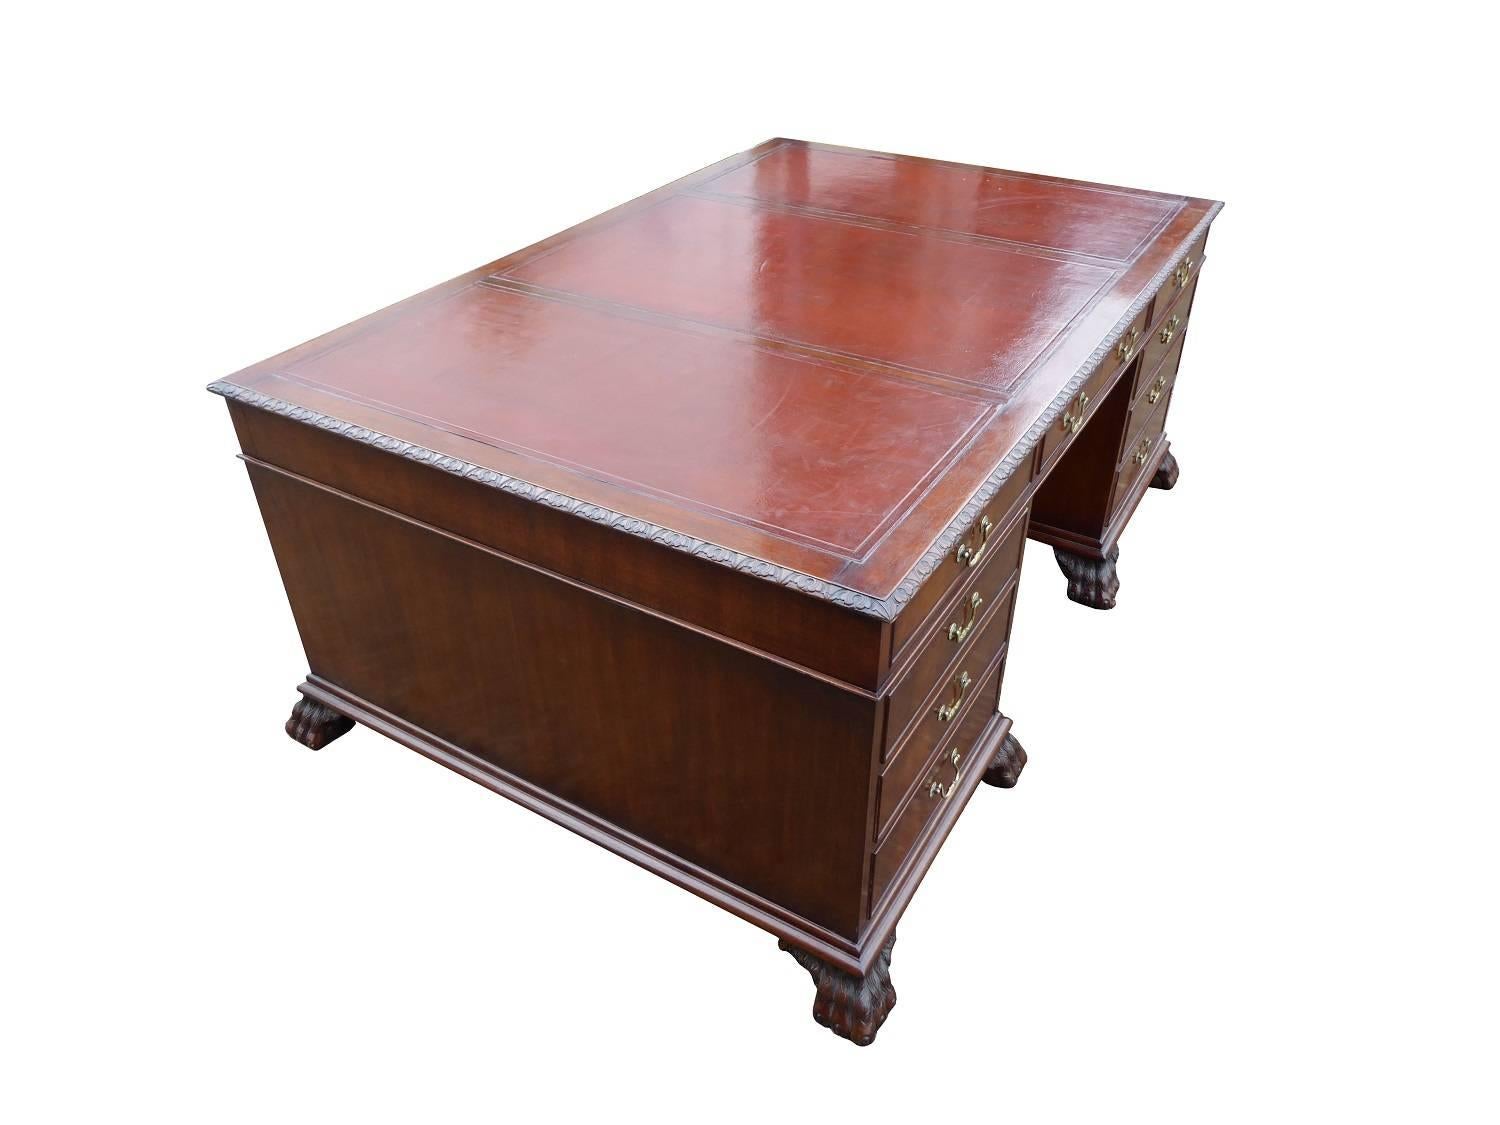 For sale is a good quality 20th century pedestal partners desk. The top of the desk has three very good quality leather hide inserts with tooling. The top also has three opposing drawers on each side. The top fits onto two pedestals, one side with